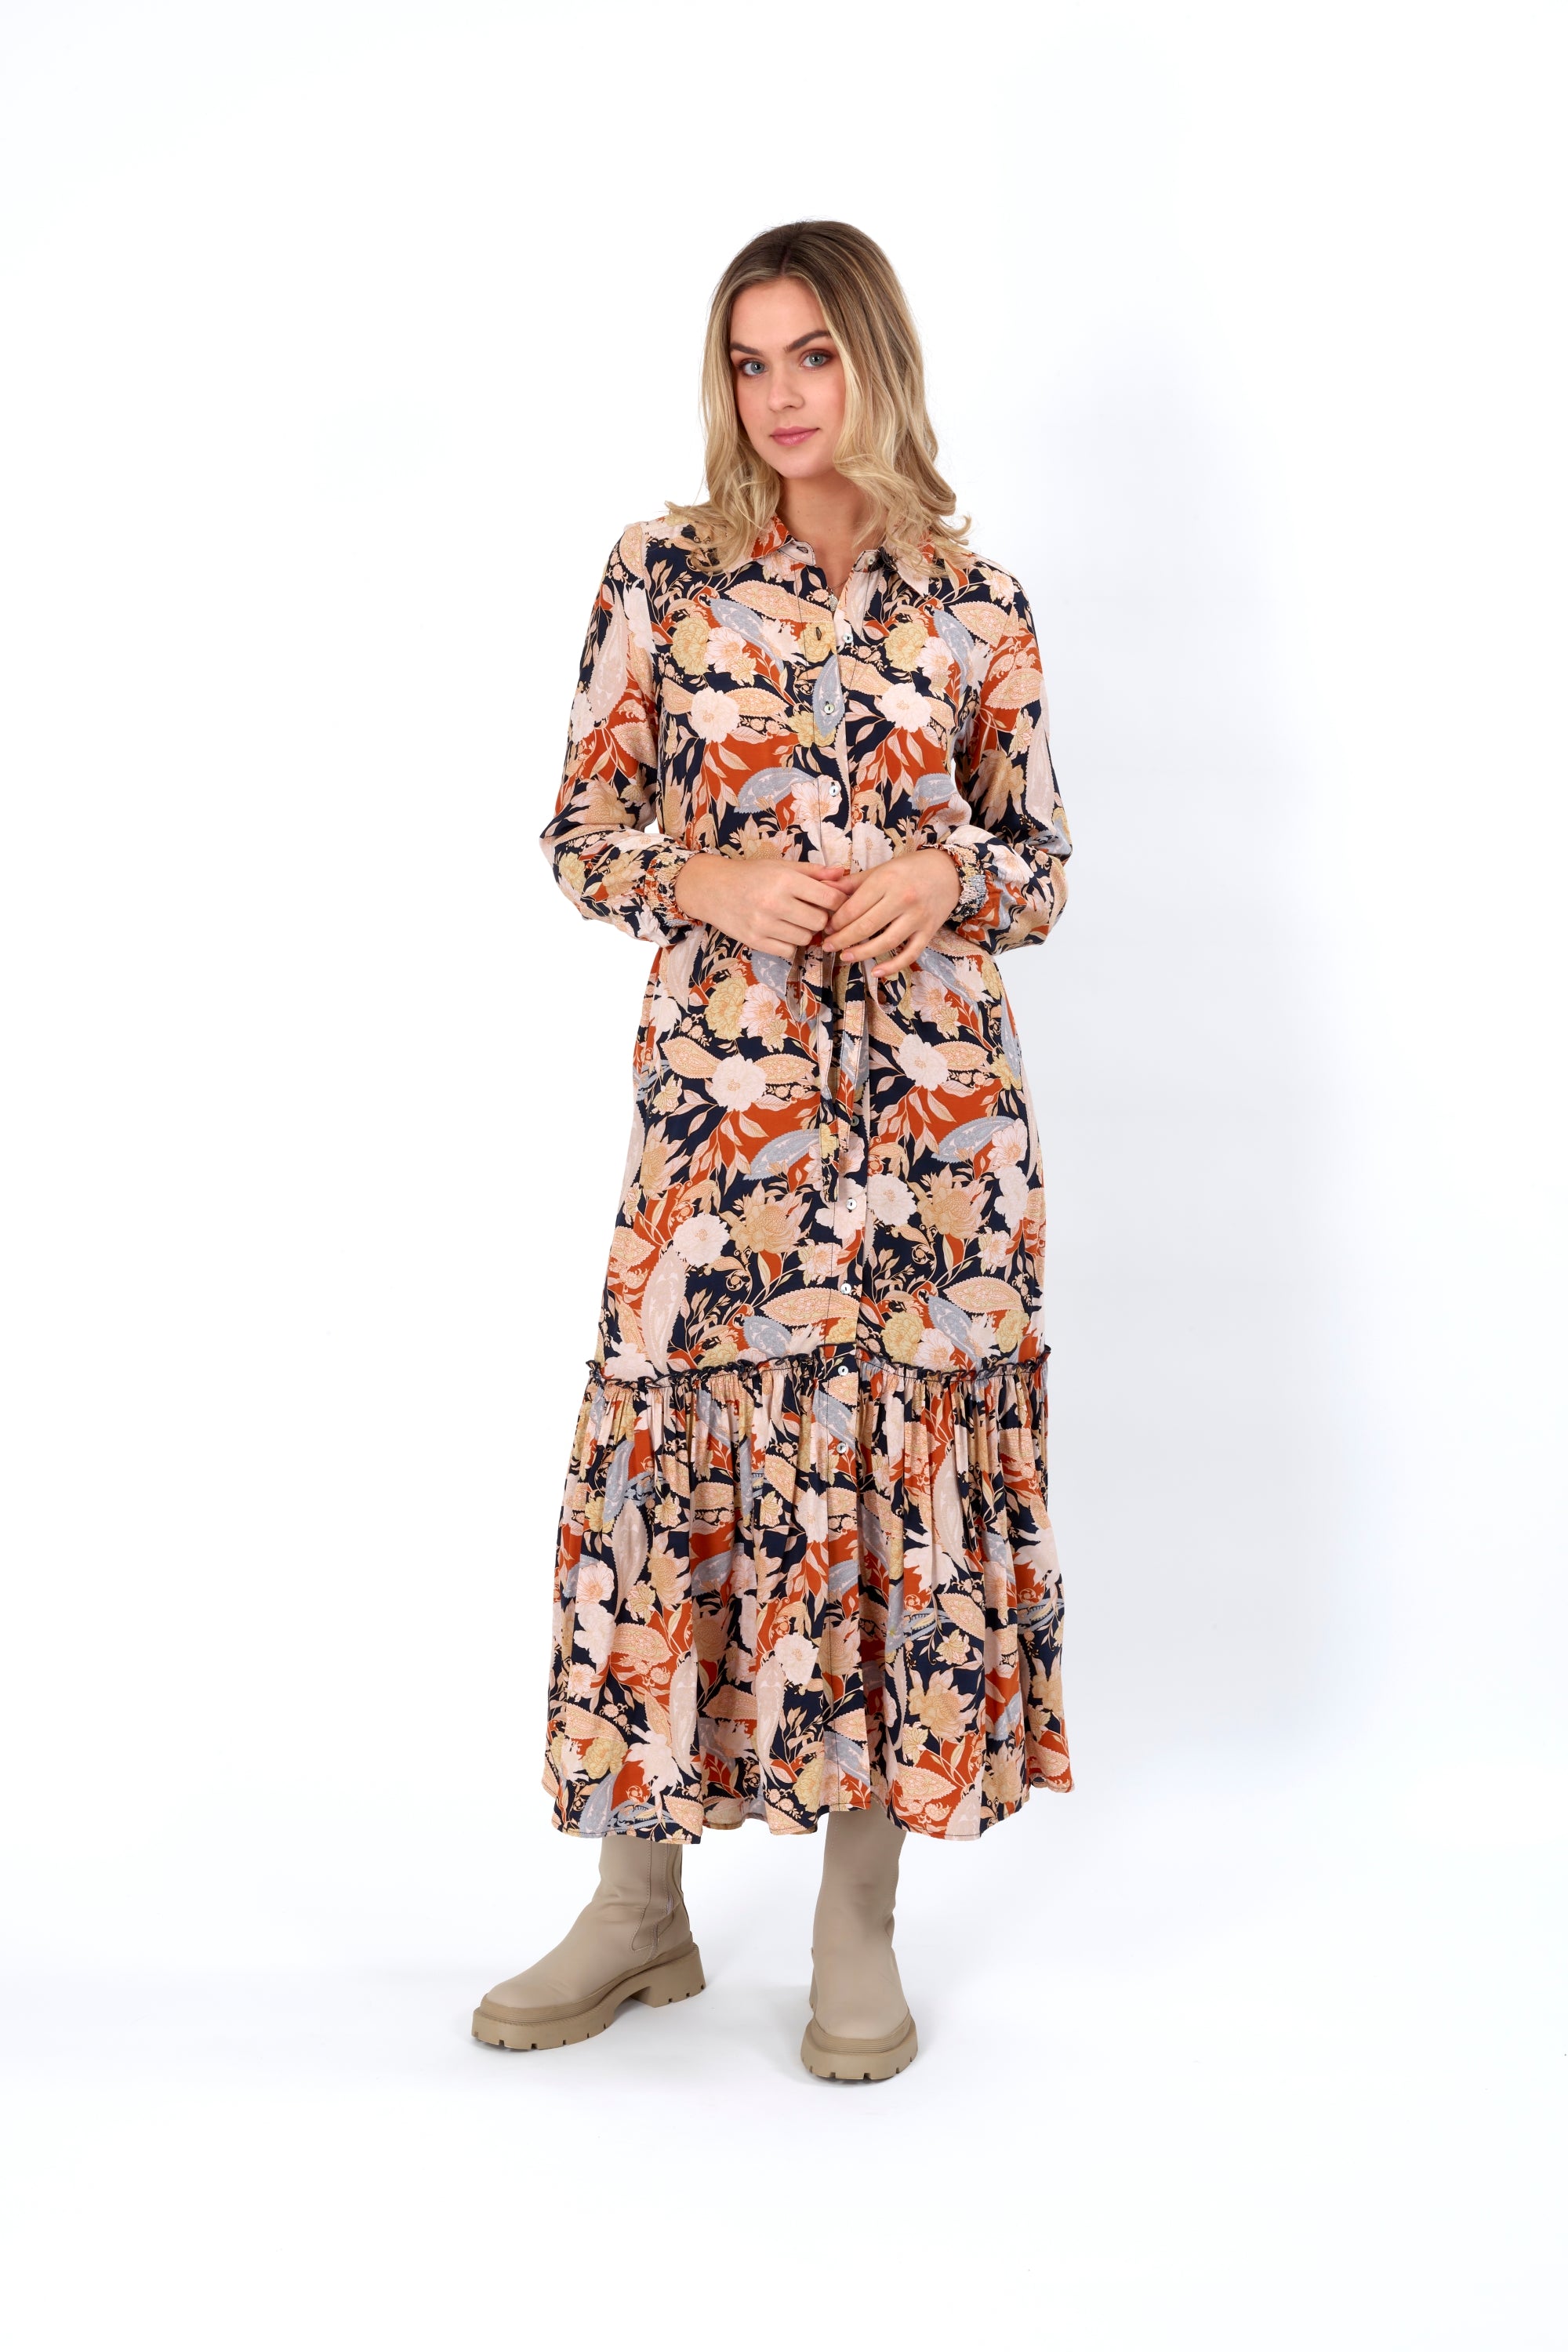 Knewe Assembly Dress - Spicy Bloom